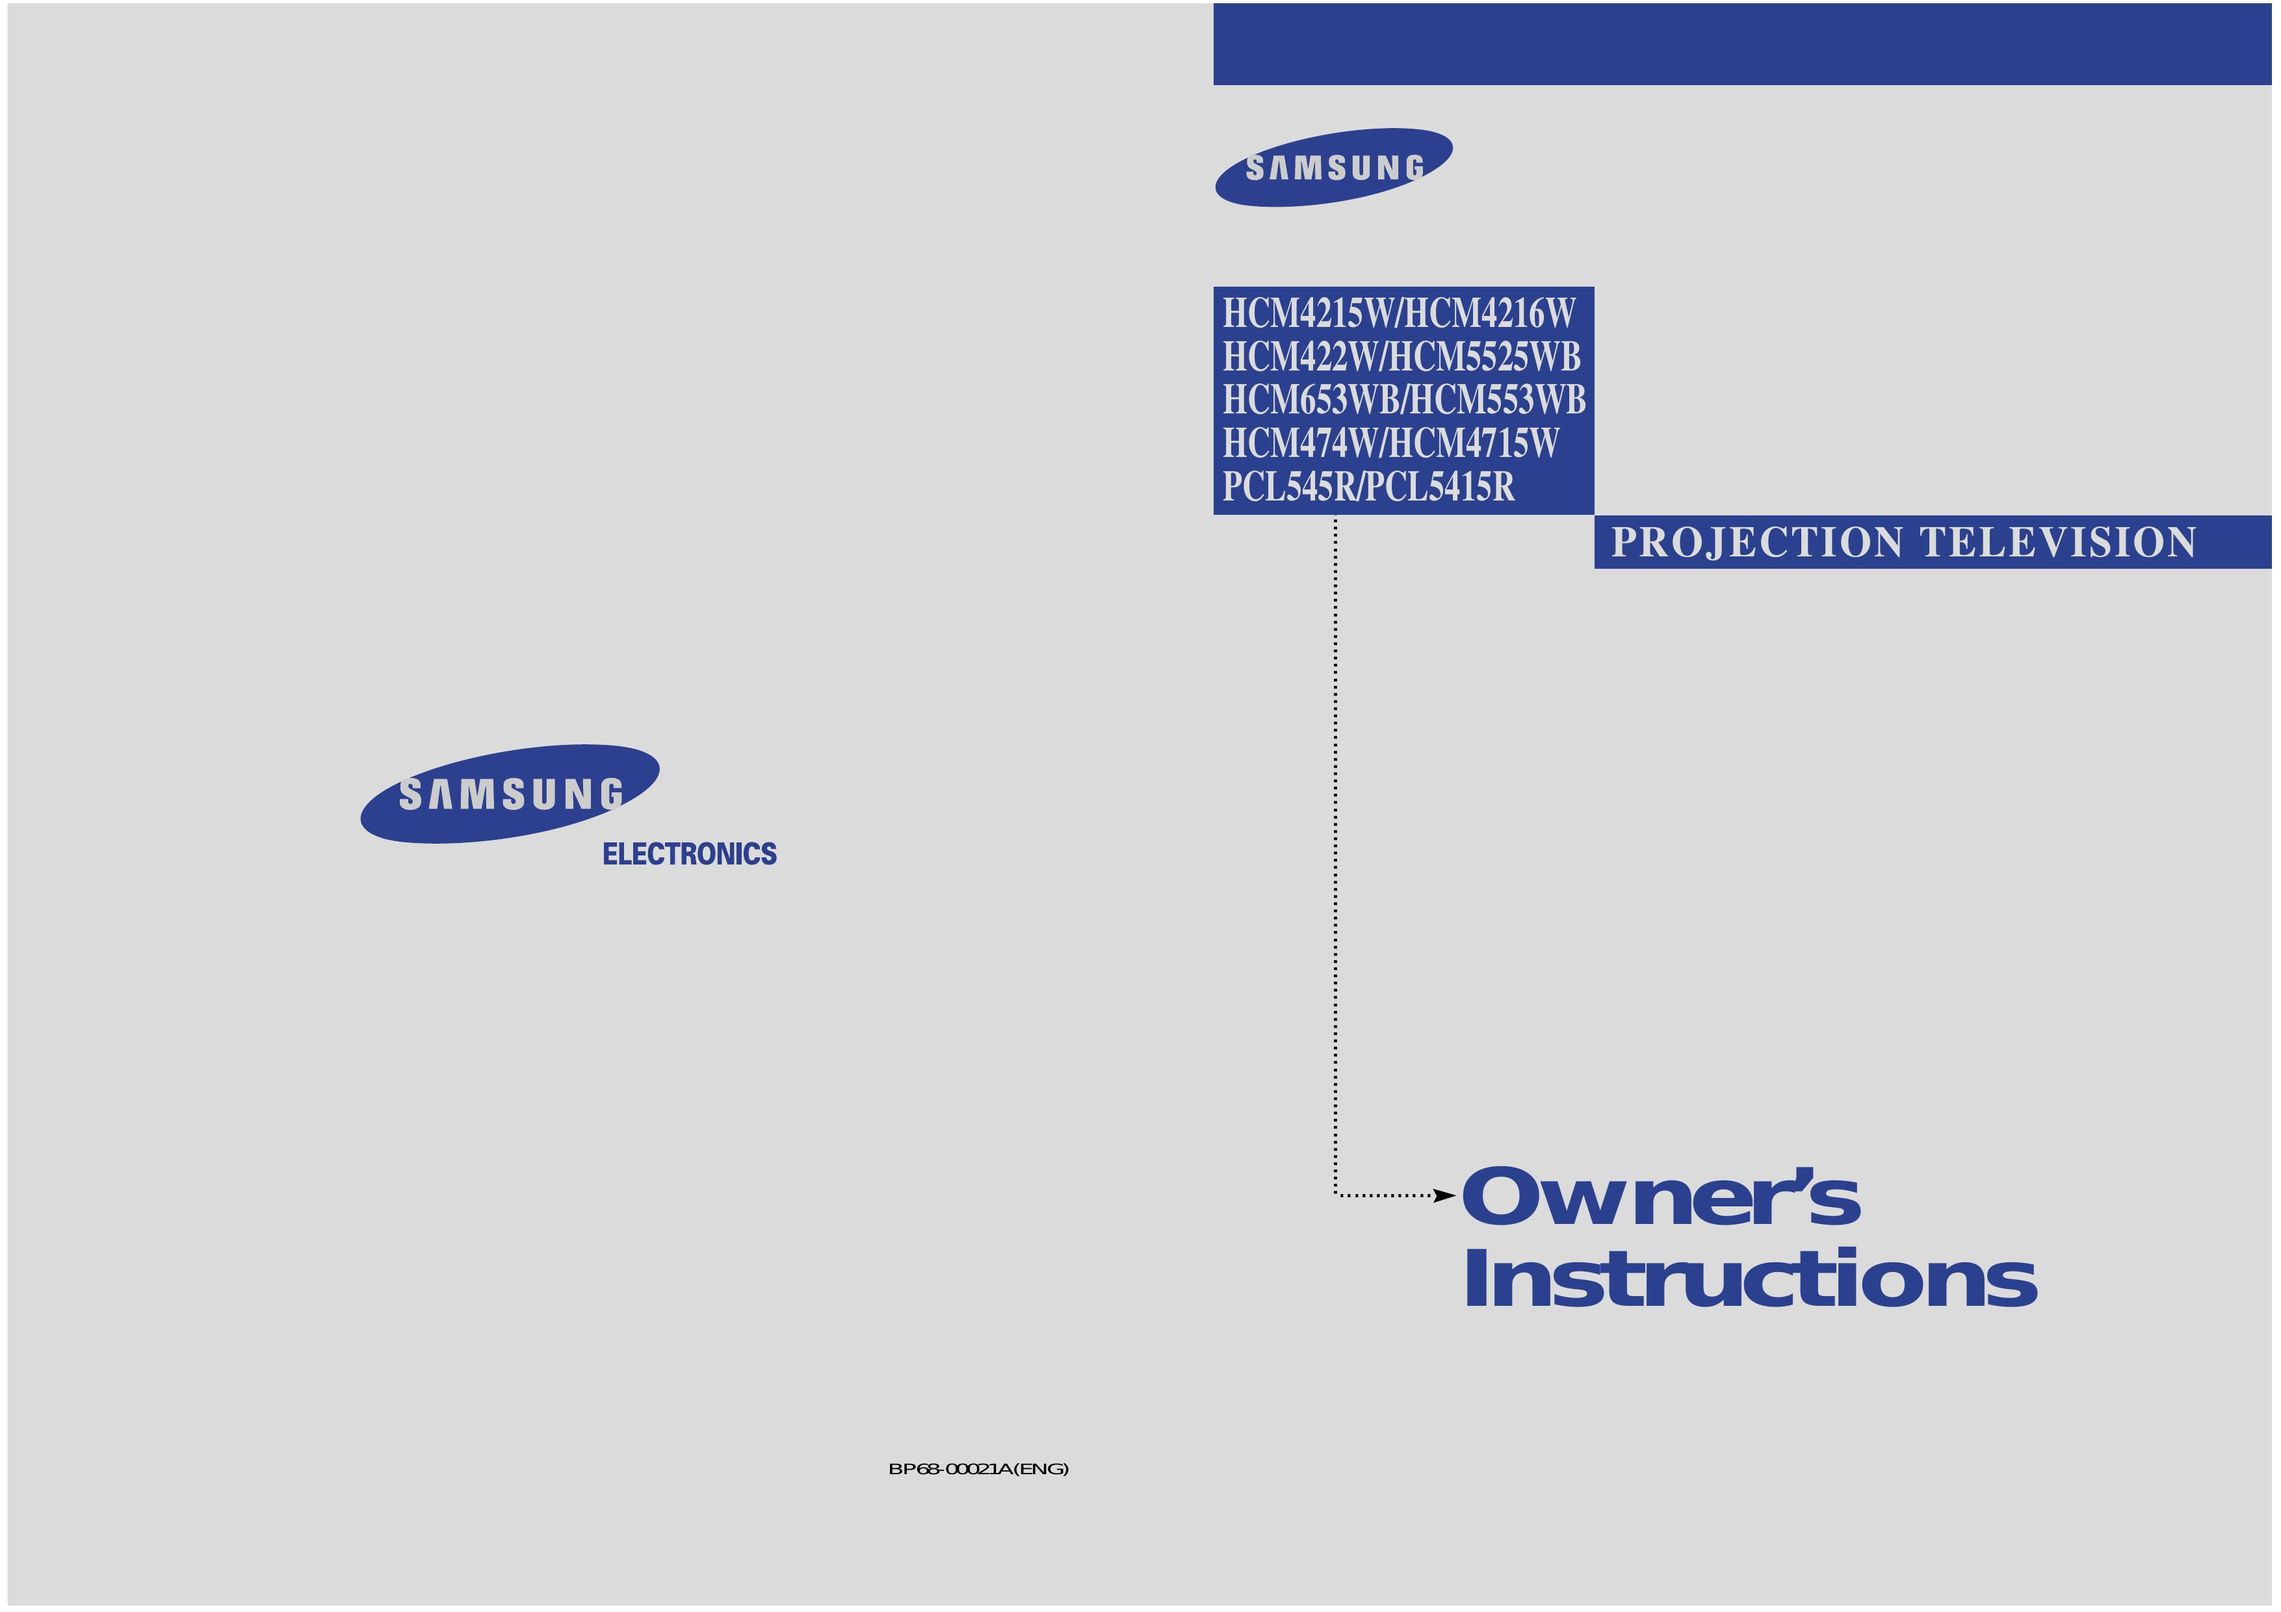 Samsung HCM653WB Projection Television User Manual